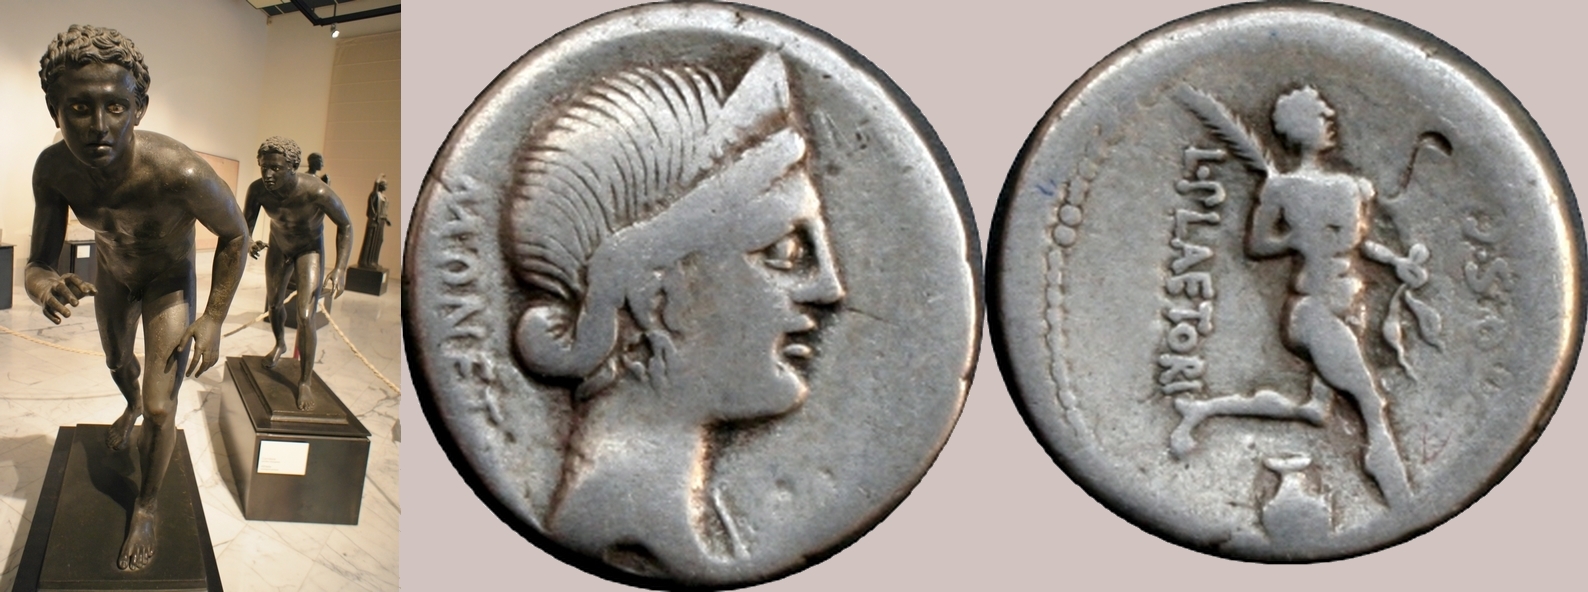 71BC 396/1 coin of Plaetoria athletes series, with two bronze athletes from the Villa of the Papyri Herculaneum